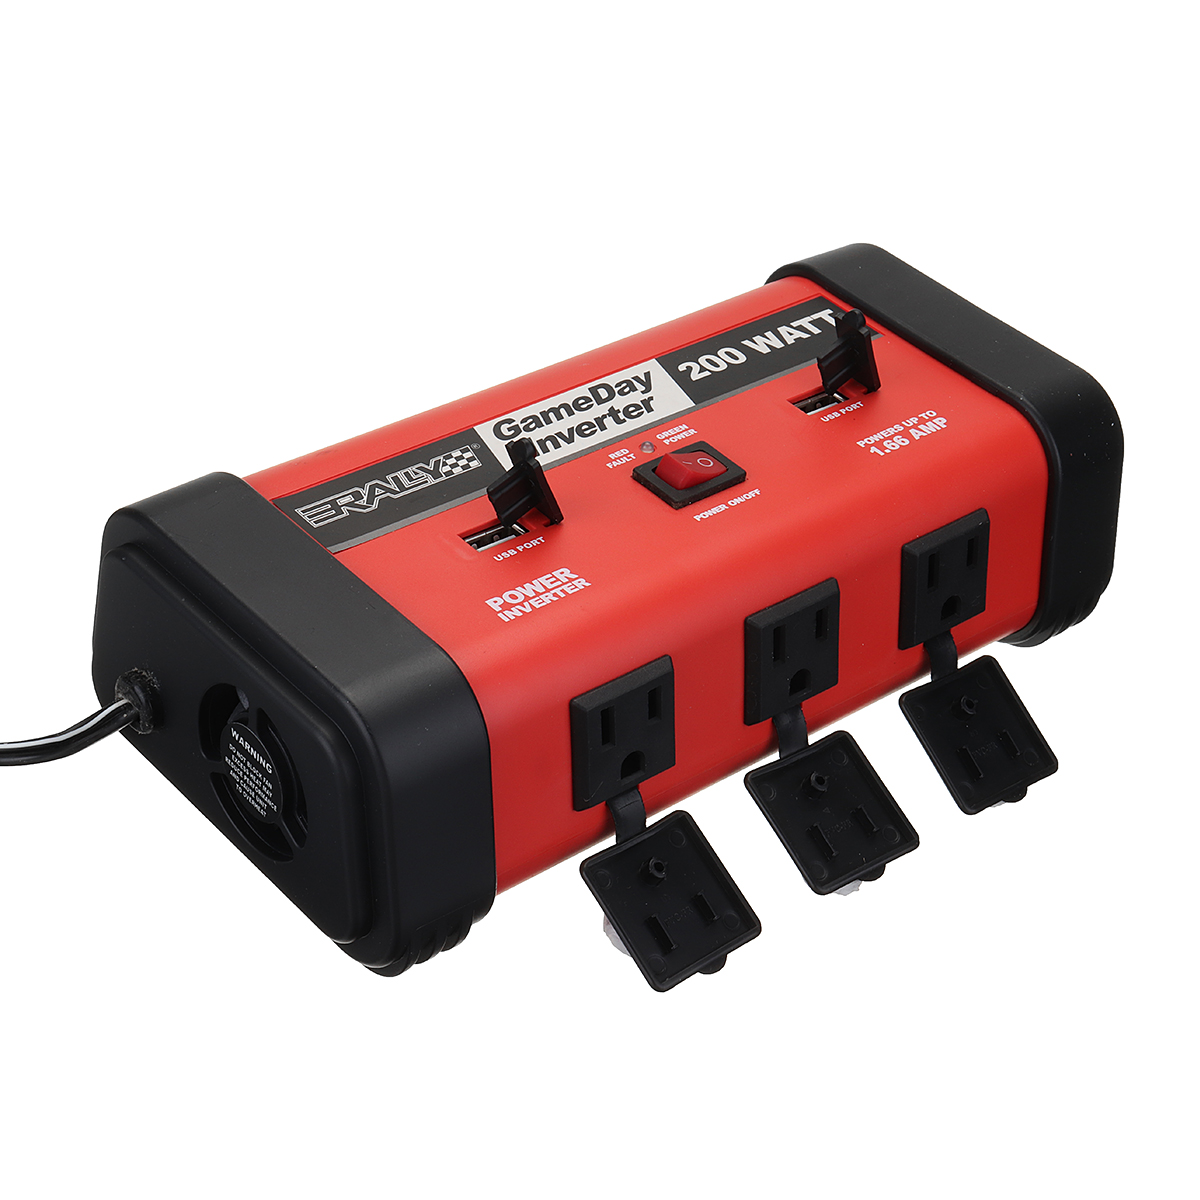 

200W Power Inverter DC 12V to AC 110V USB Charger Adapter Modified sine wave Converter